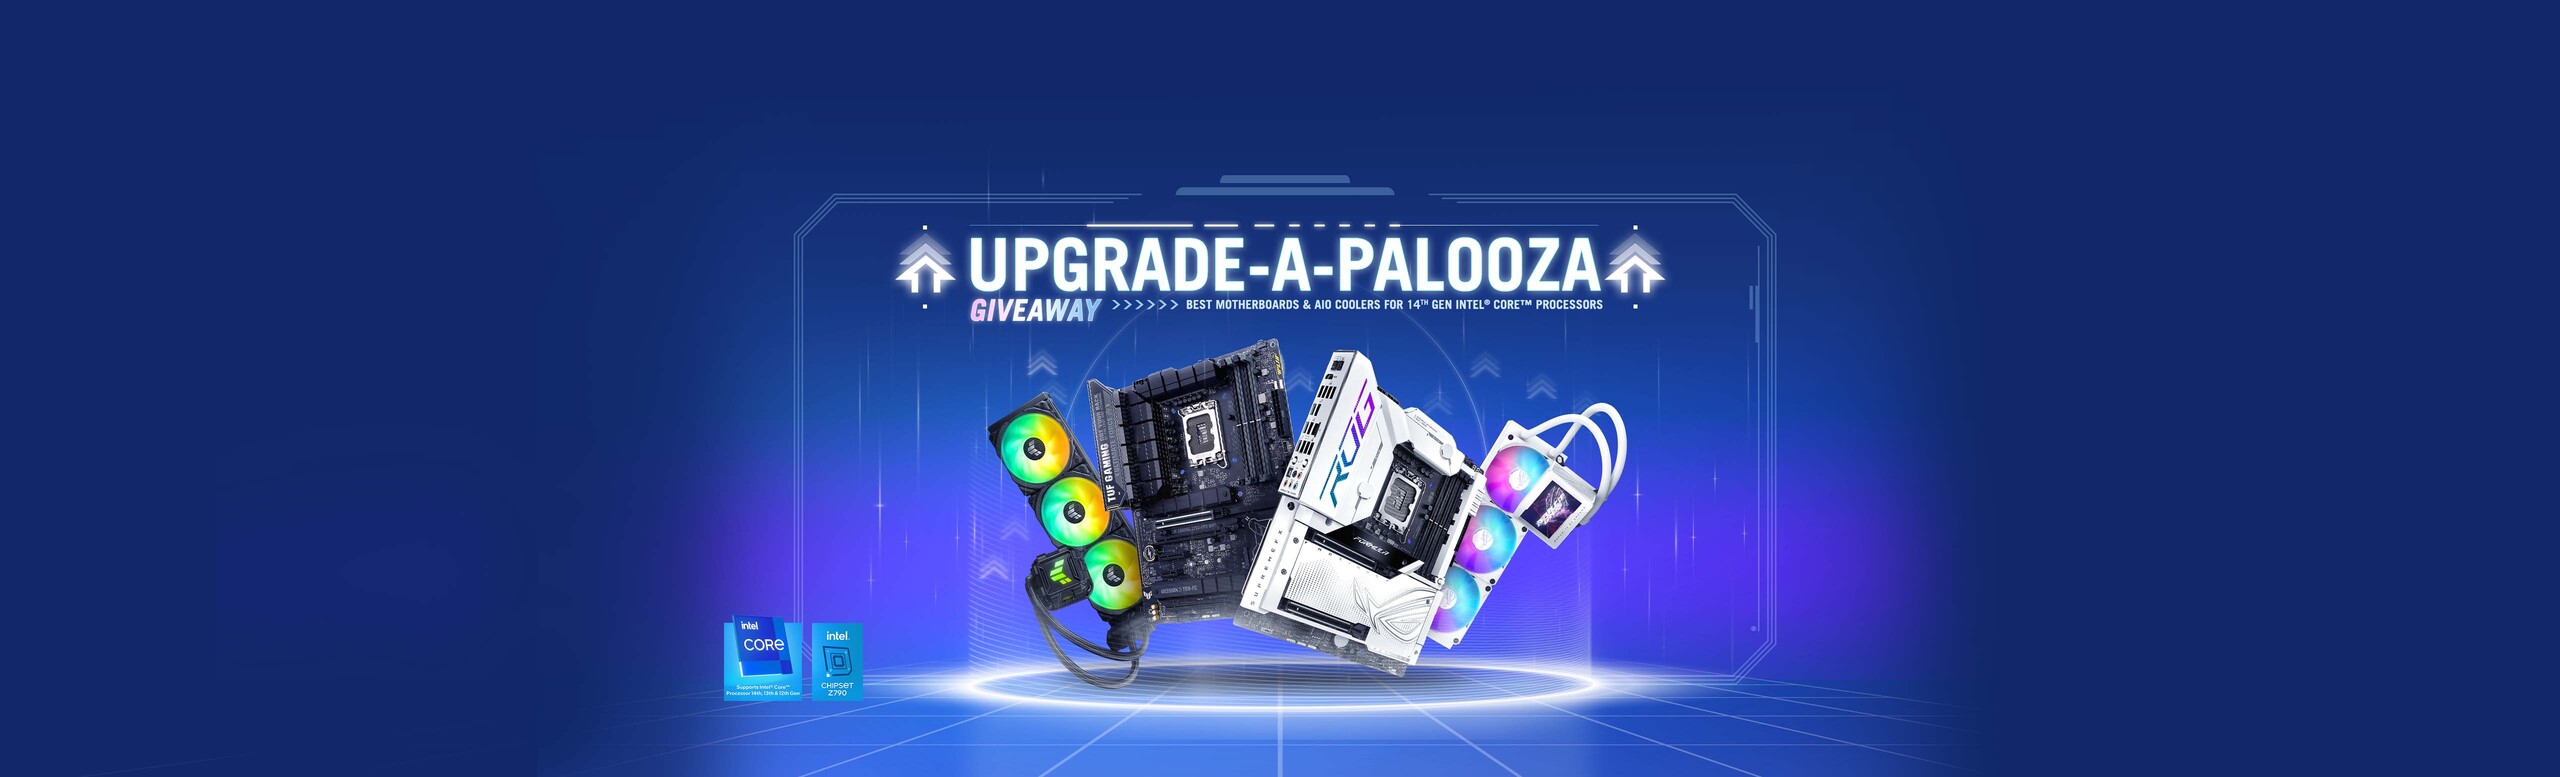 ASUS Z790 motherboard & AIO Cooler campaign banner